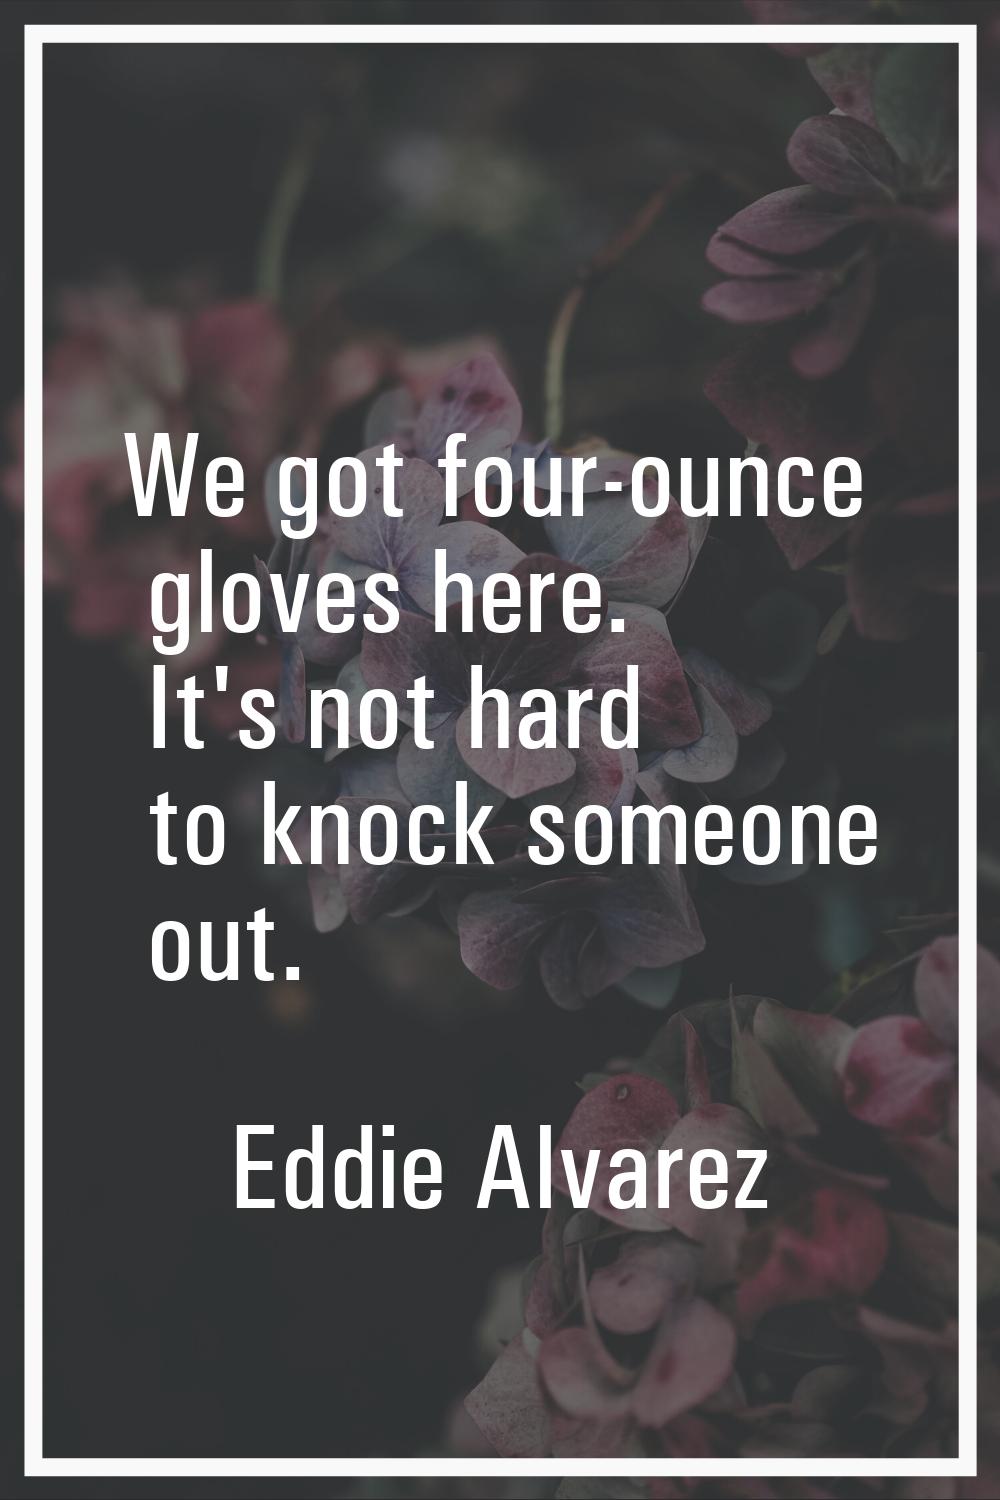 We got four-ounce gloves here. It's not hard to knock someone out.